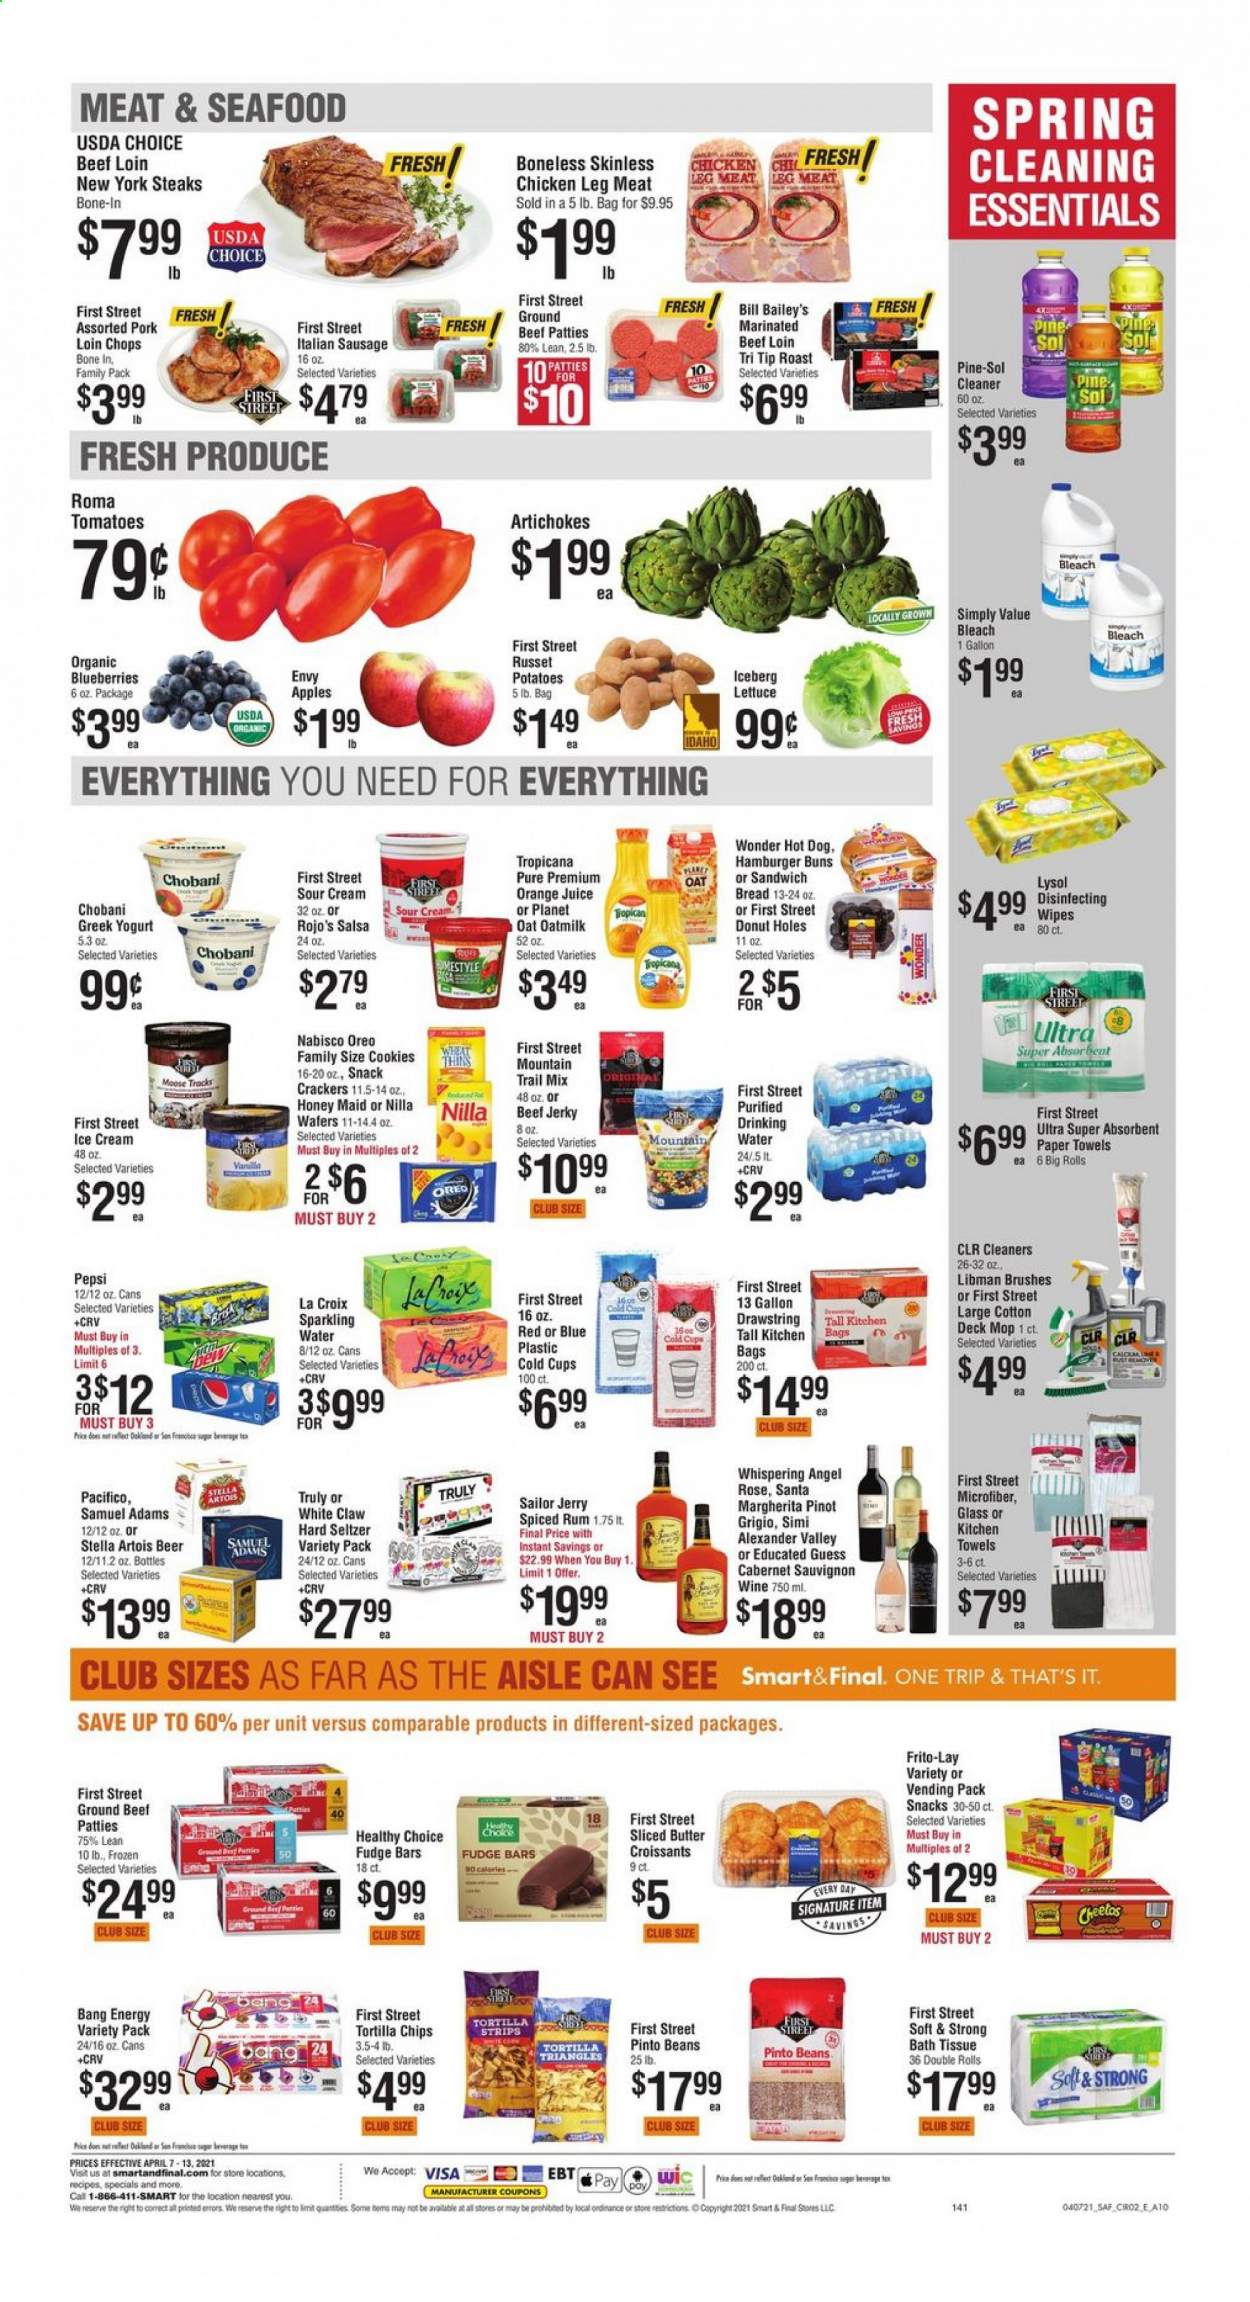 thumbnail - Smart & Final Flyer - 04/07/2021 - 04/13/2021 - Sales products - Stella Artois, lettuce, bread, croissant, buns, burger buns, donut holes, artichoke, beans, tomatoes, apples, blueberries, seafood, hot dog, sandwich, Healthy Choice, beef jerky, jerky, sausage, italian sausage, greek yoghurt, Oreo, yoghurt, Chobani, oat milk, sour cream, ice cream, cookies, fudge, snack, crackers, Santa, tortilla chips, Cheetos, Frito-Lay, Honey Maid, pinto beans, salsa, Pepsi, orange juice, juice, seltzer water, sparkling water, Cabernet Sauvignon, red wine, white wine, wine, Pinot Grigio, rosé wine, rum, spiced rum, White Claw, Hard Seltzer, TRULY, beer, chicken legs, beef meat, ground beef, steak, marinated beef, pork chops, pork loin, pork meat, bath tissue, kitchen towels, paper towels, bleach, russet potatoes. Page 3.